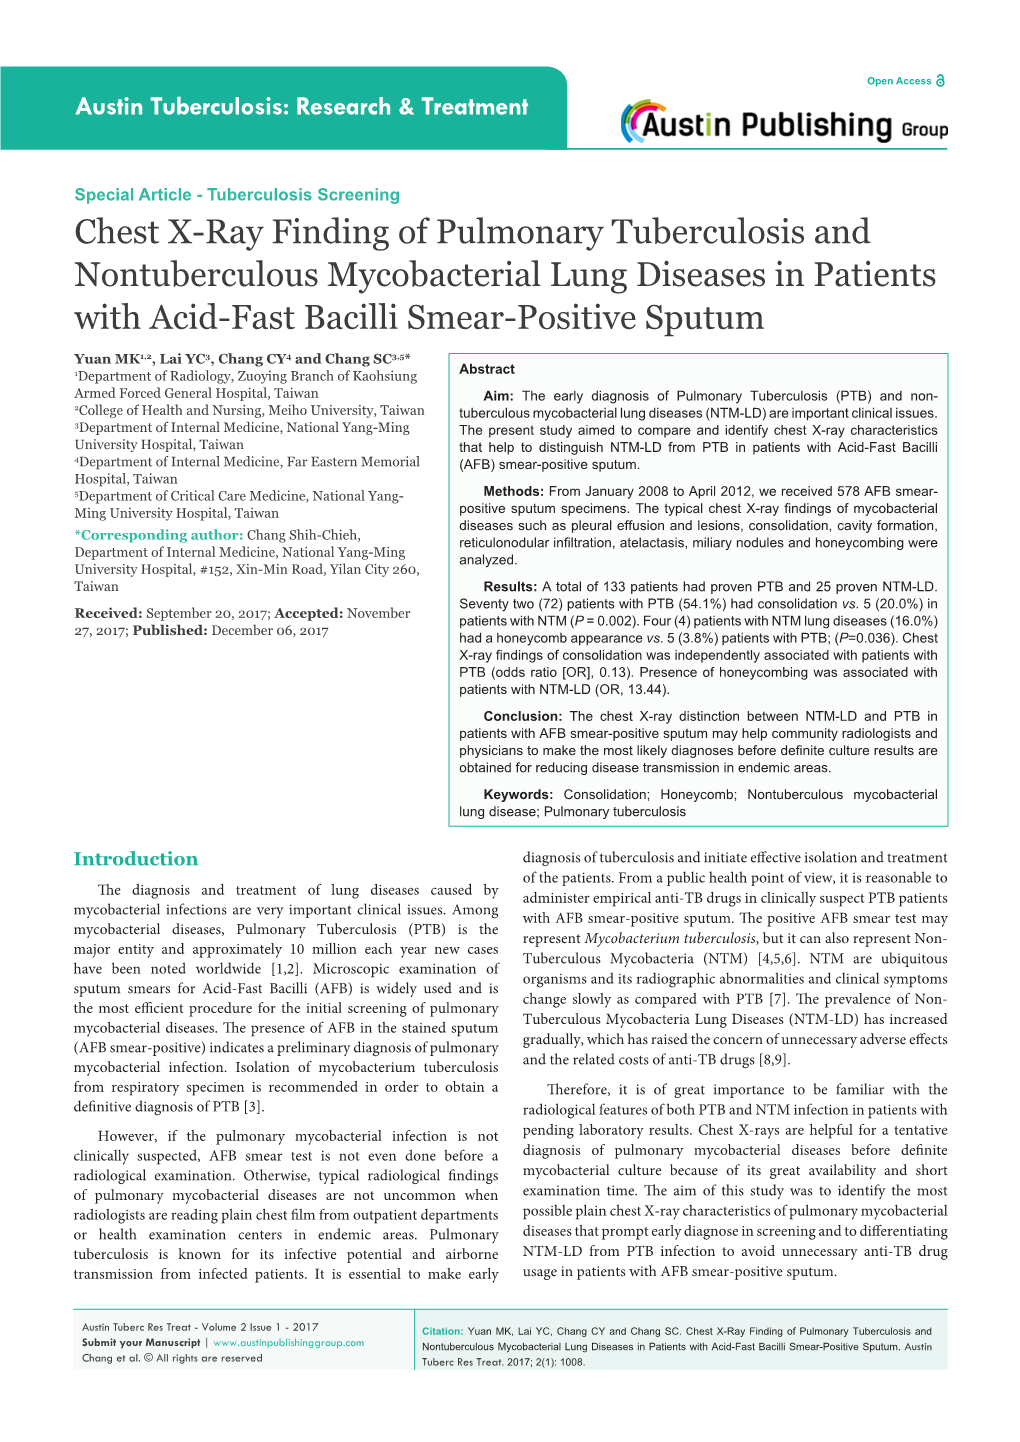 Chest X-Ray Finding of Pulmonary Tuberculosis and Nontuberculous Mycobacterial Lung Diseases in Patients with Acid-Fast Bacilli Smear-Positive Sputum